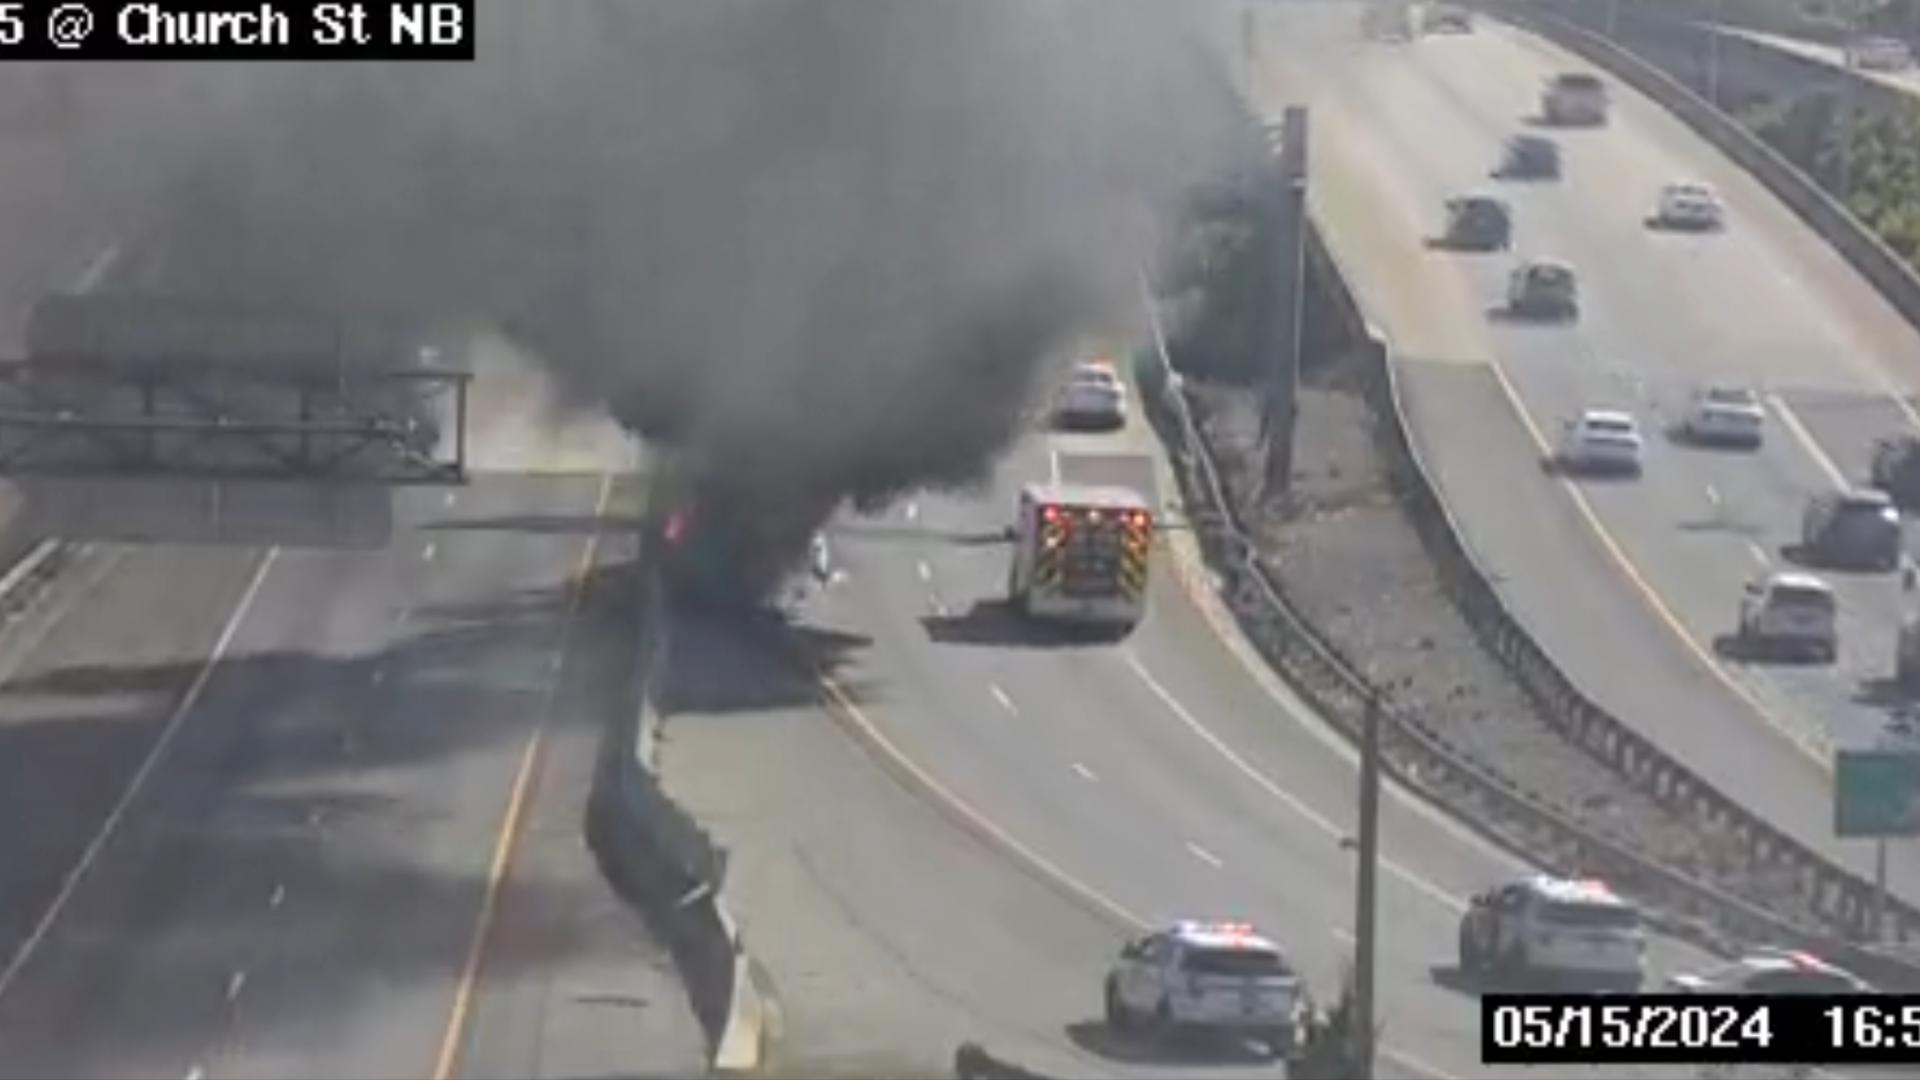 Plumes of smoke covered the roadway around 4:50 p.m.